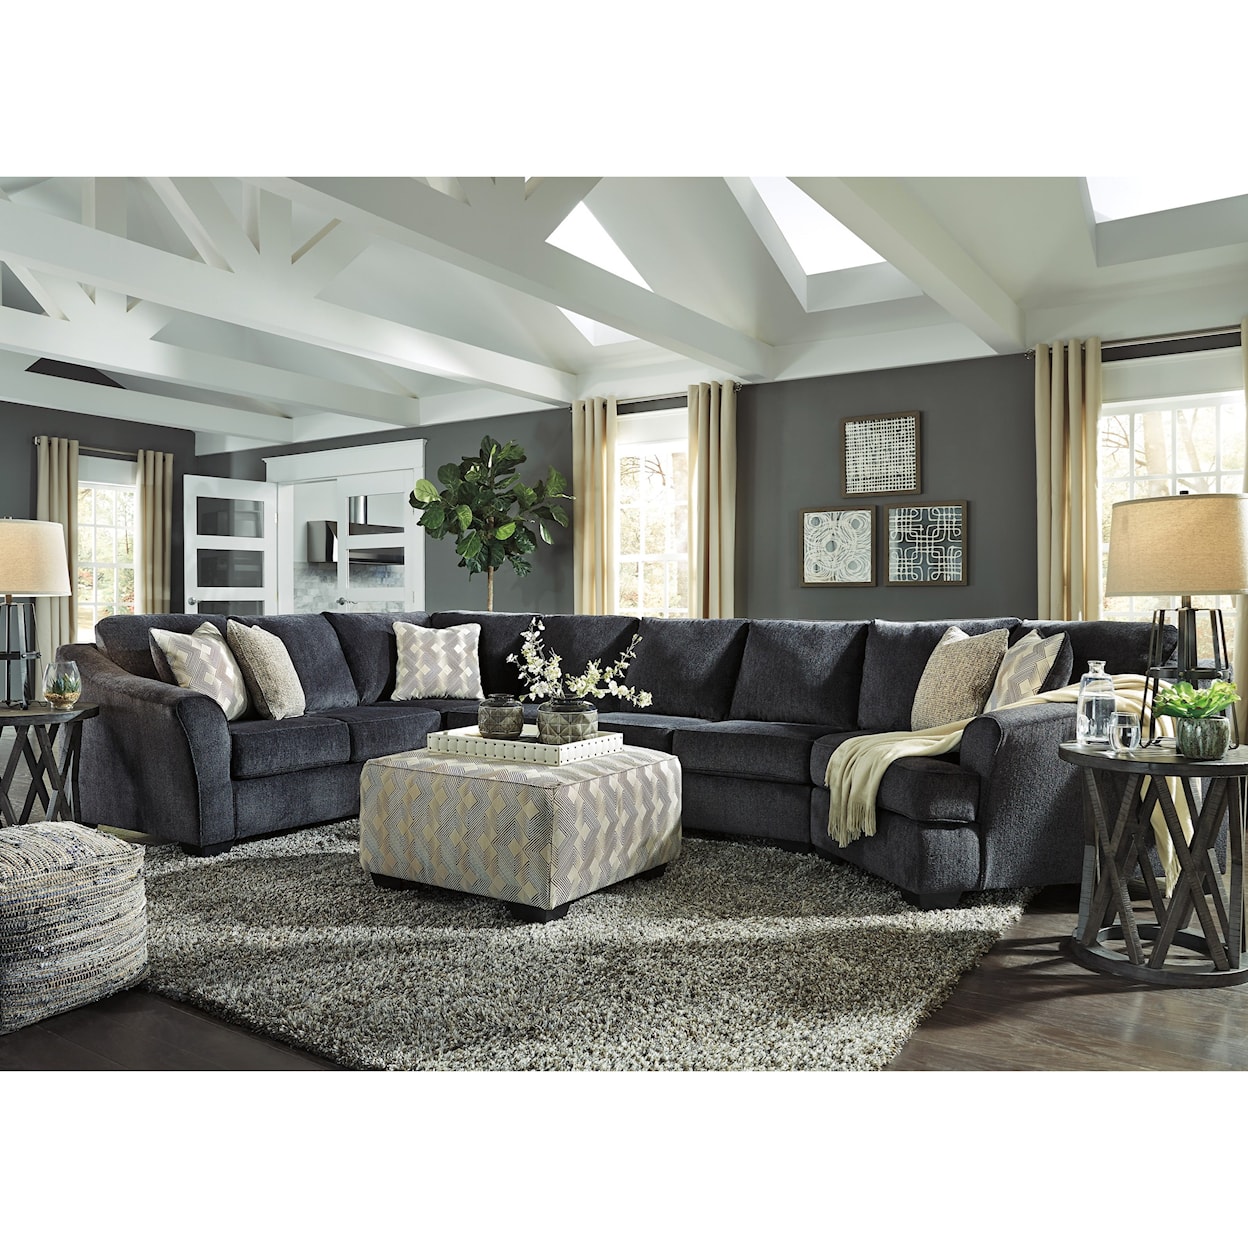 Michael Alan Select Eltmann 4-Piece Sectional with Right Cuddler